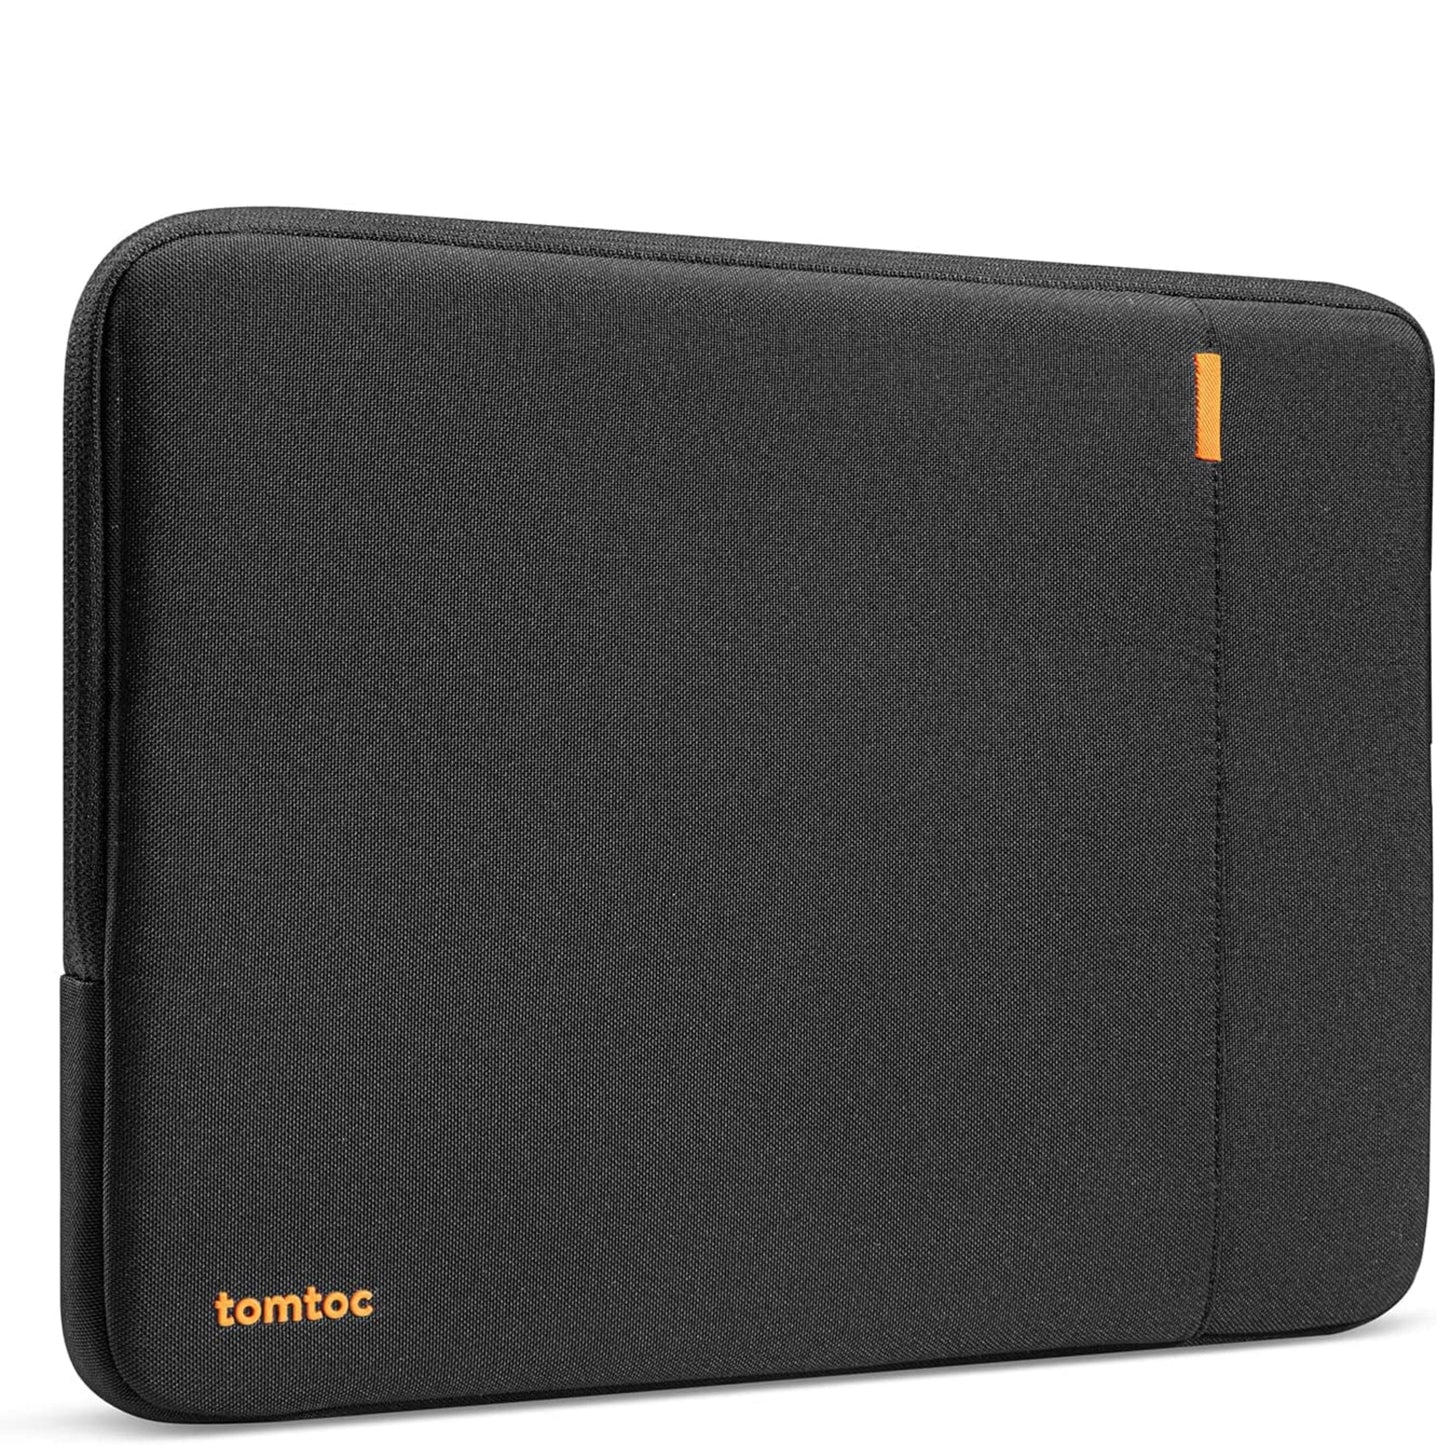 TOMTOC Laptops & Accessories Black TOMTOC -  Protective Laptop Sleeve